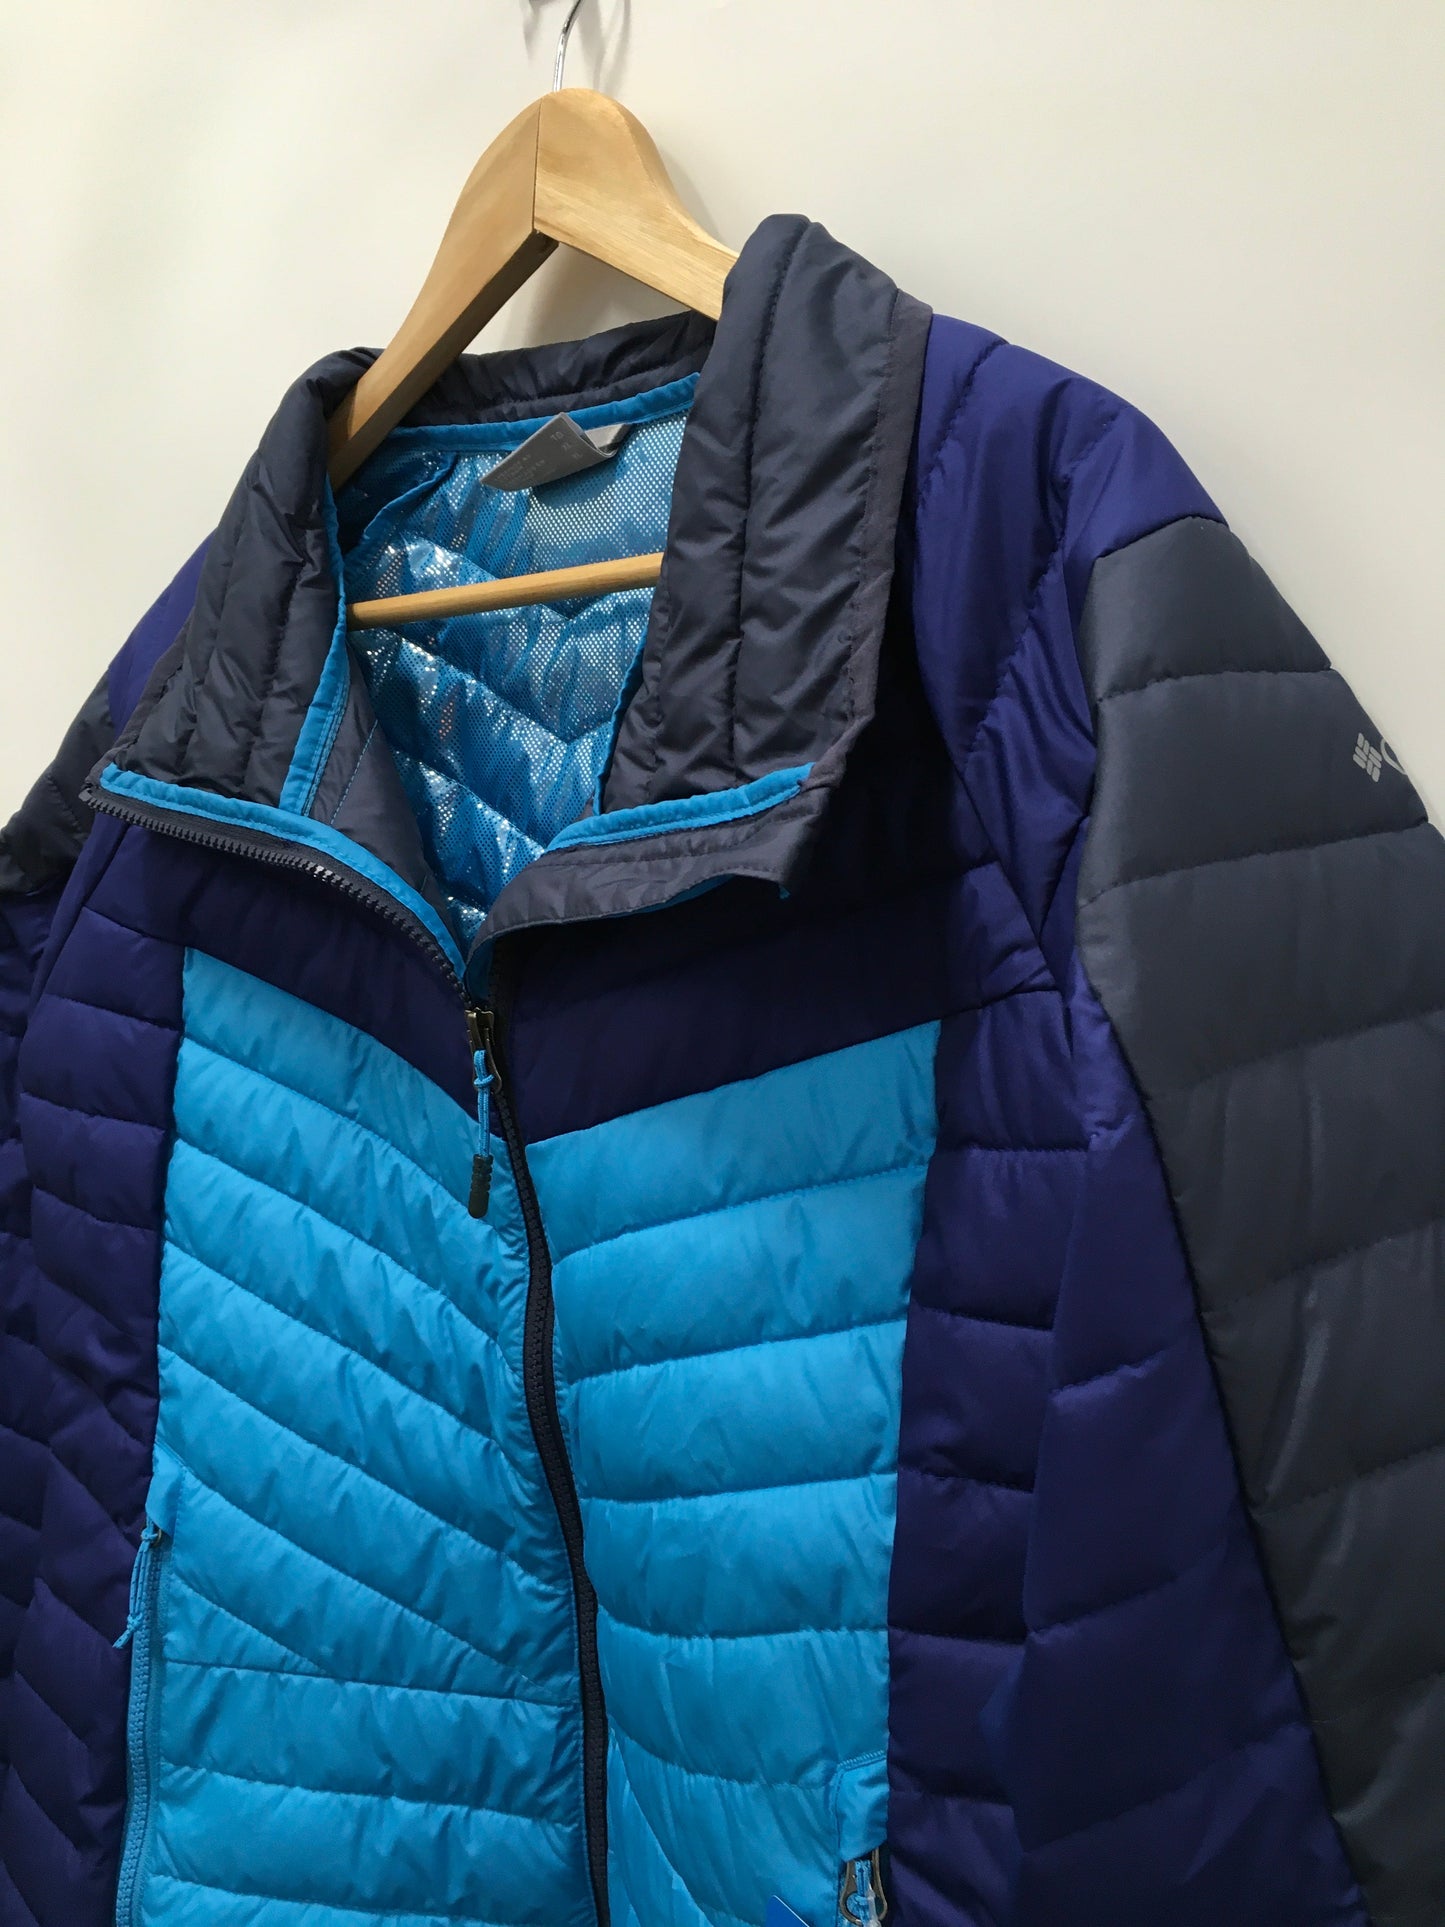 Navy Jacket Puffer & Quilted Columbia, Size Xl